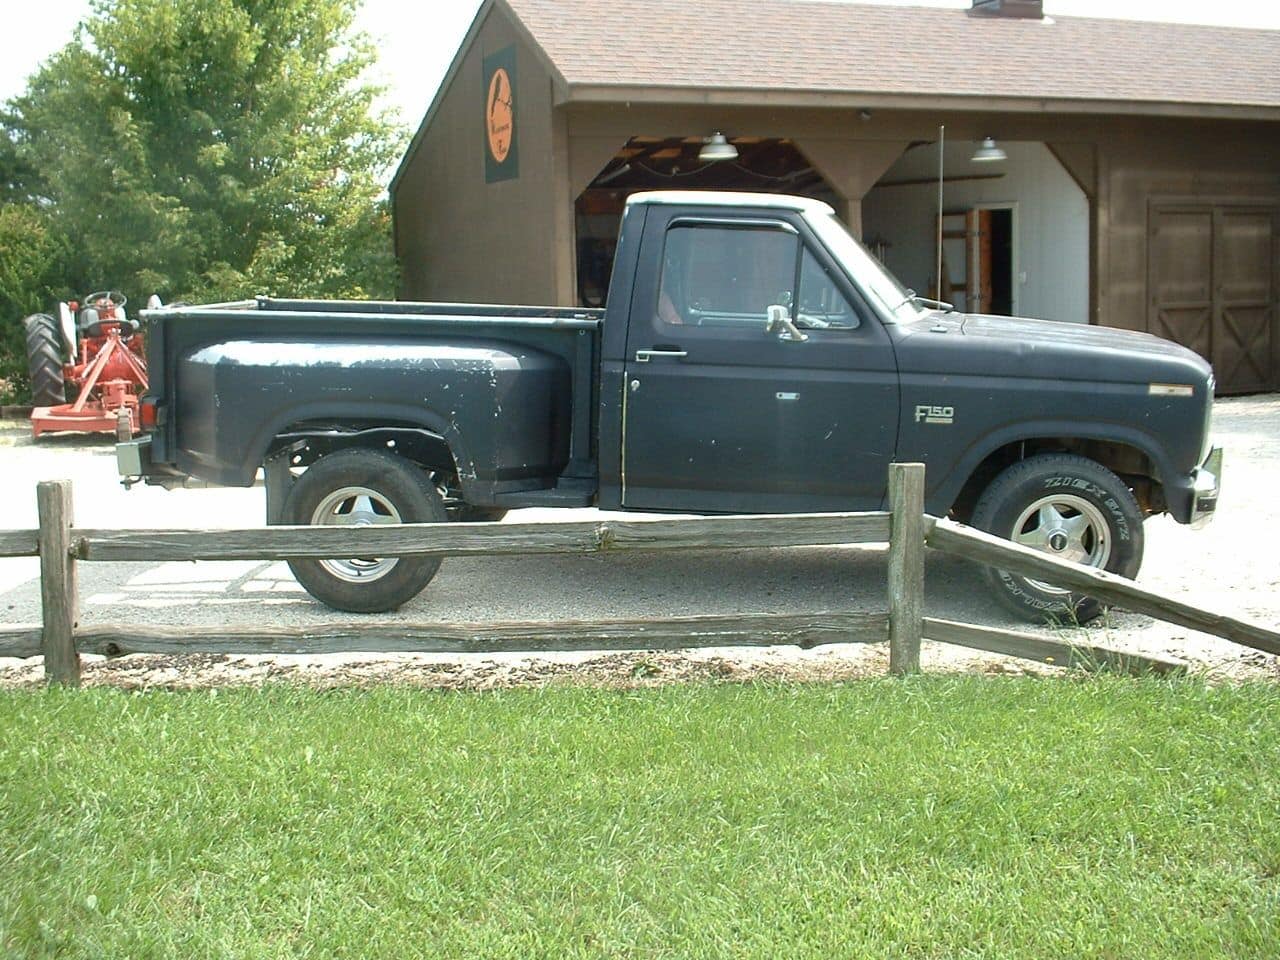 1986 Ford F-150 - 1986 F150 4.9L , c6 auto., 3.08 rear end ratio, Factory air cond. - Used - VIN 1FTDF15Y7GNA8 - 78,000 Miles - 6 cyl - 2WD - Automatic - Truck - Blue - Versailles, MO 65084, United States